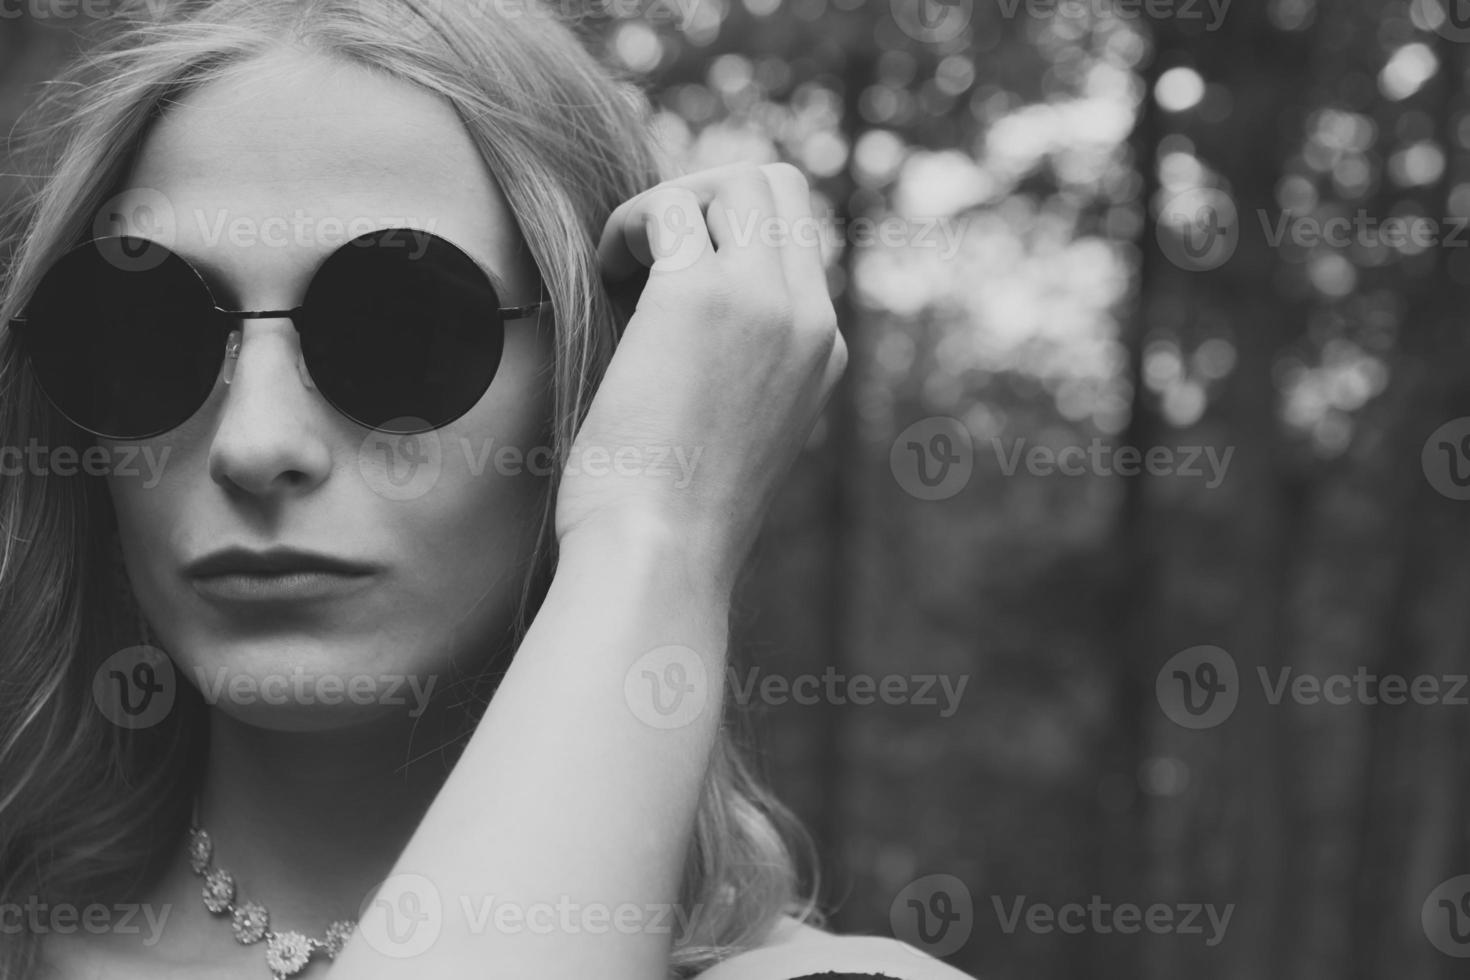 Woman in black round sunglasses in black and white photo